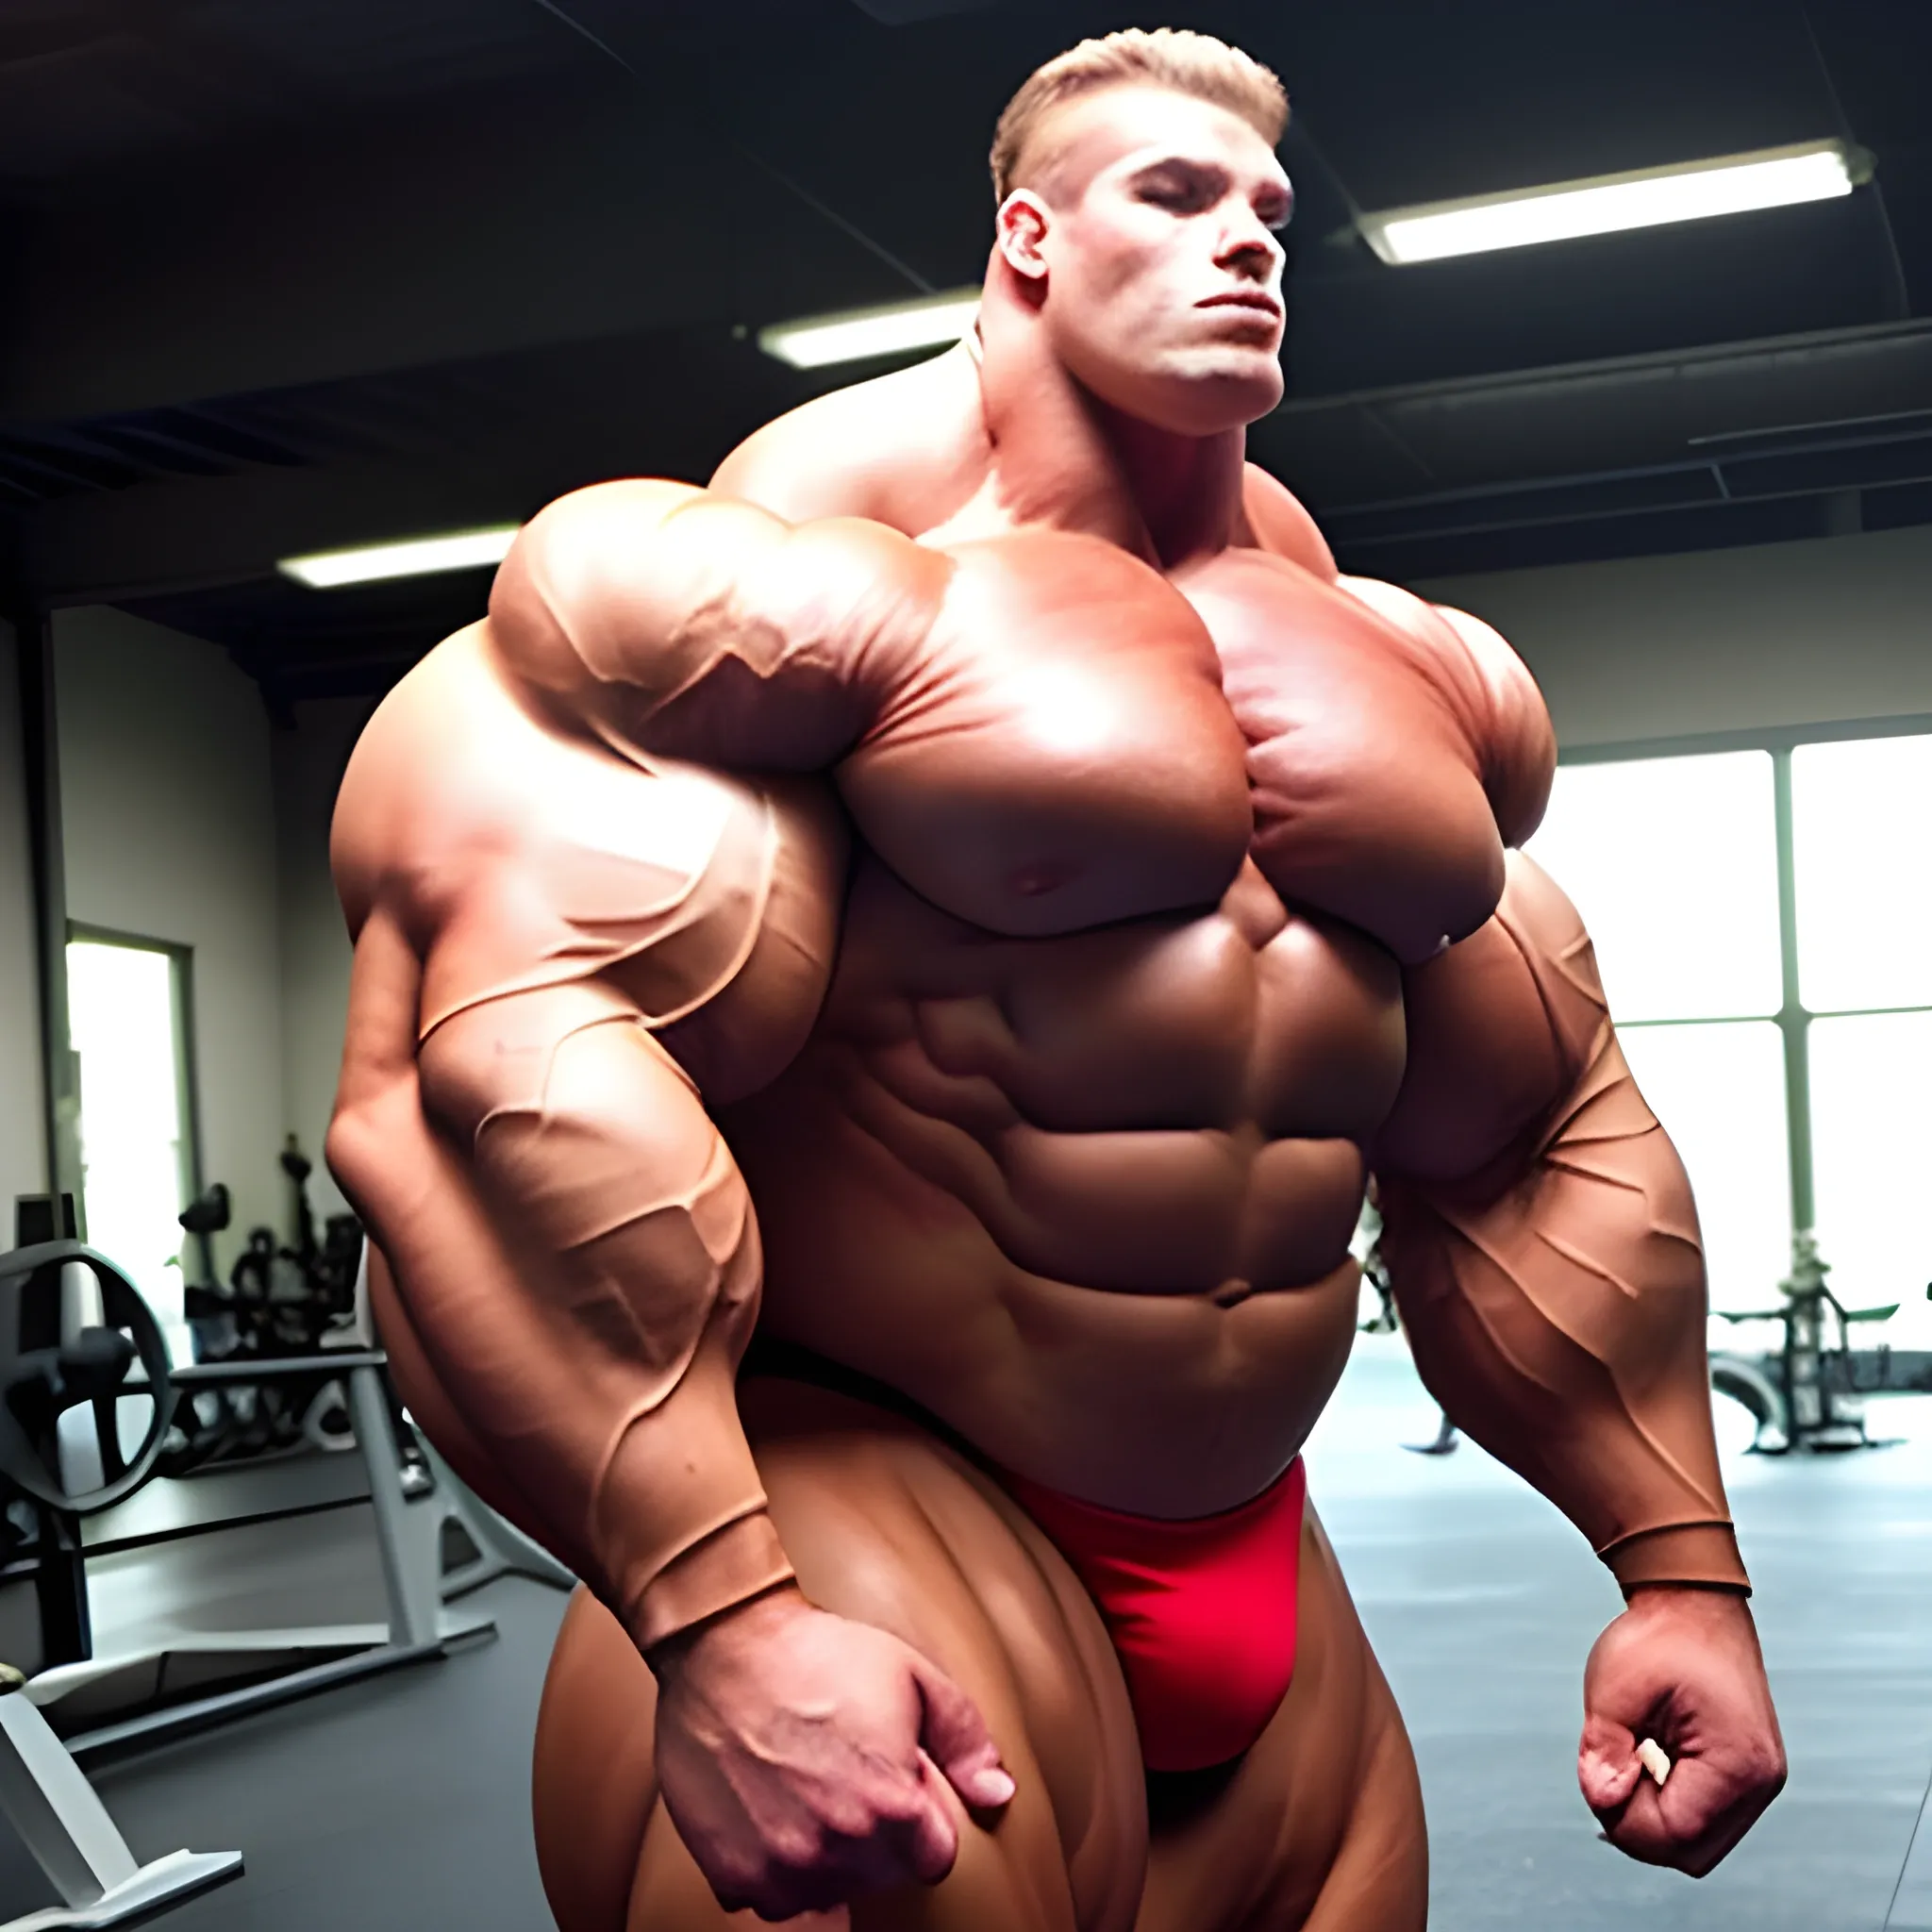 3-meter tall bodybuilder with a beautiful muscle morph, flex their massive 3000 lbs,  


